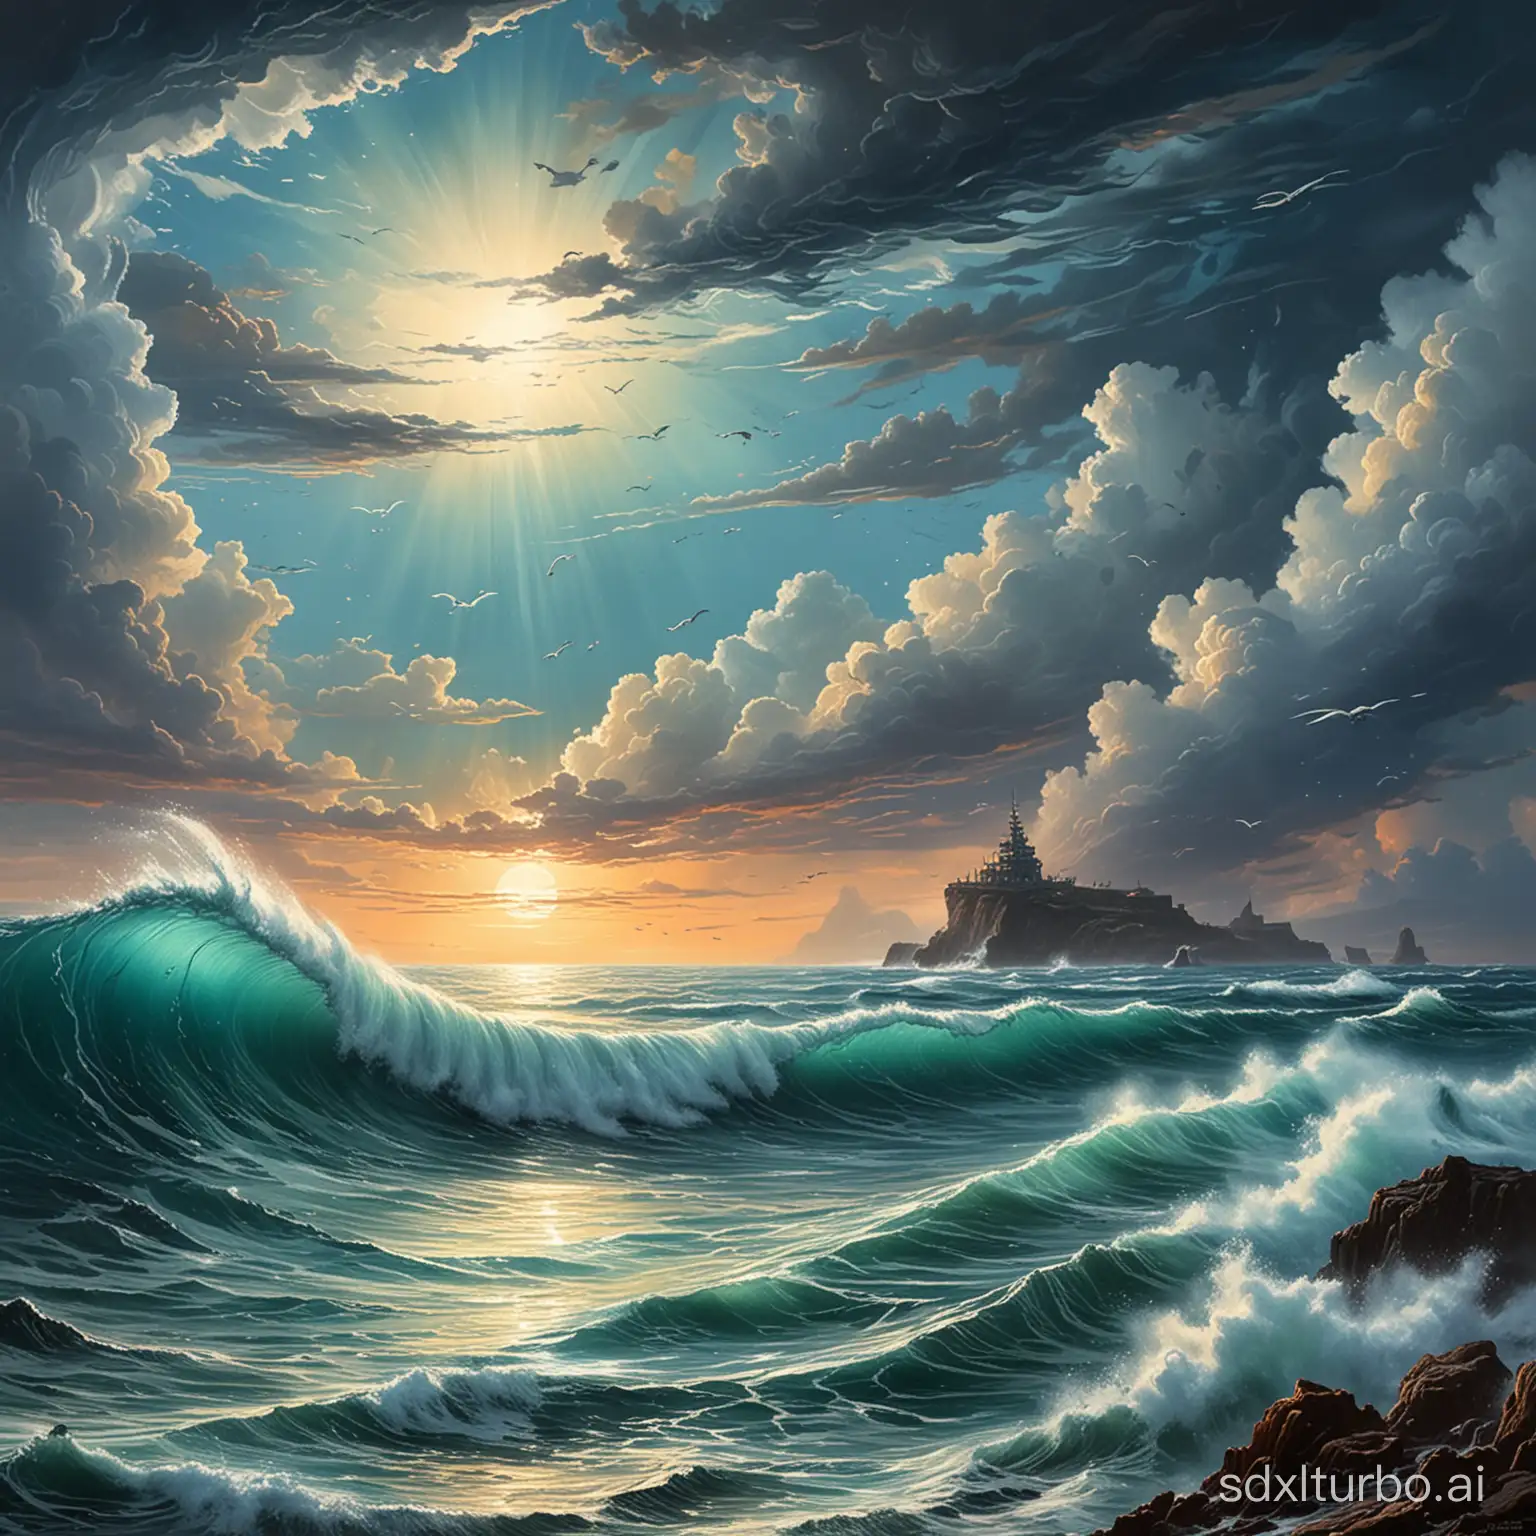 Science fiction painting about the ocean.